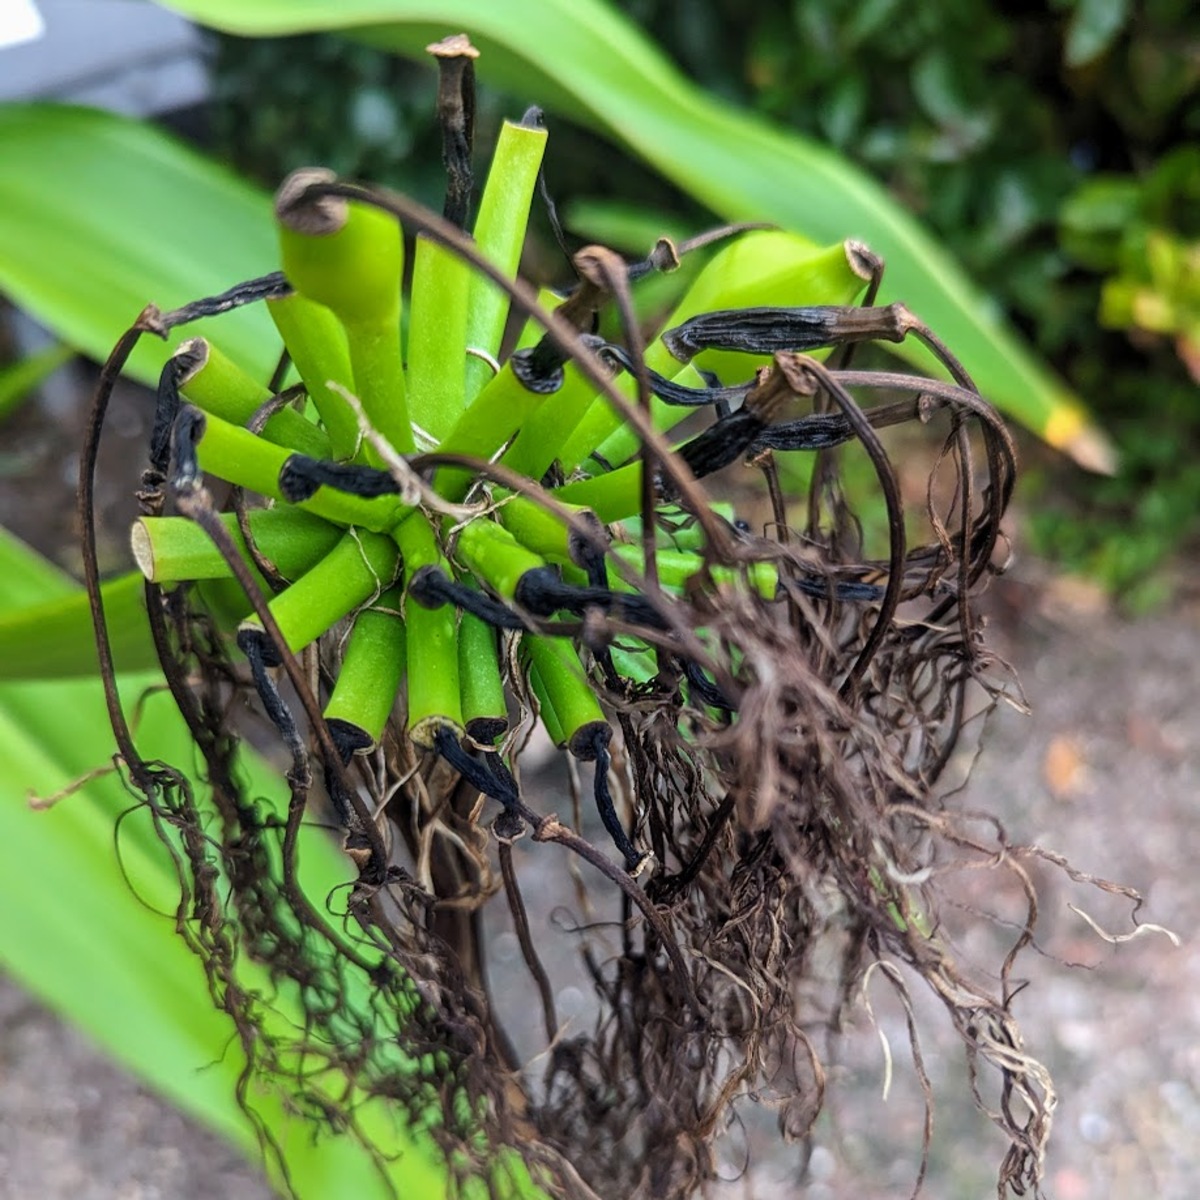 a very bright green plant with tube like structures. The tips of the tubes are black with eaching having a spindly dark brown protrusion falling toward the ground.